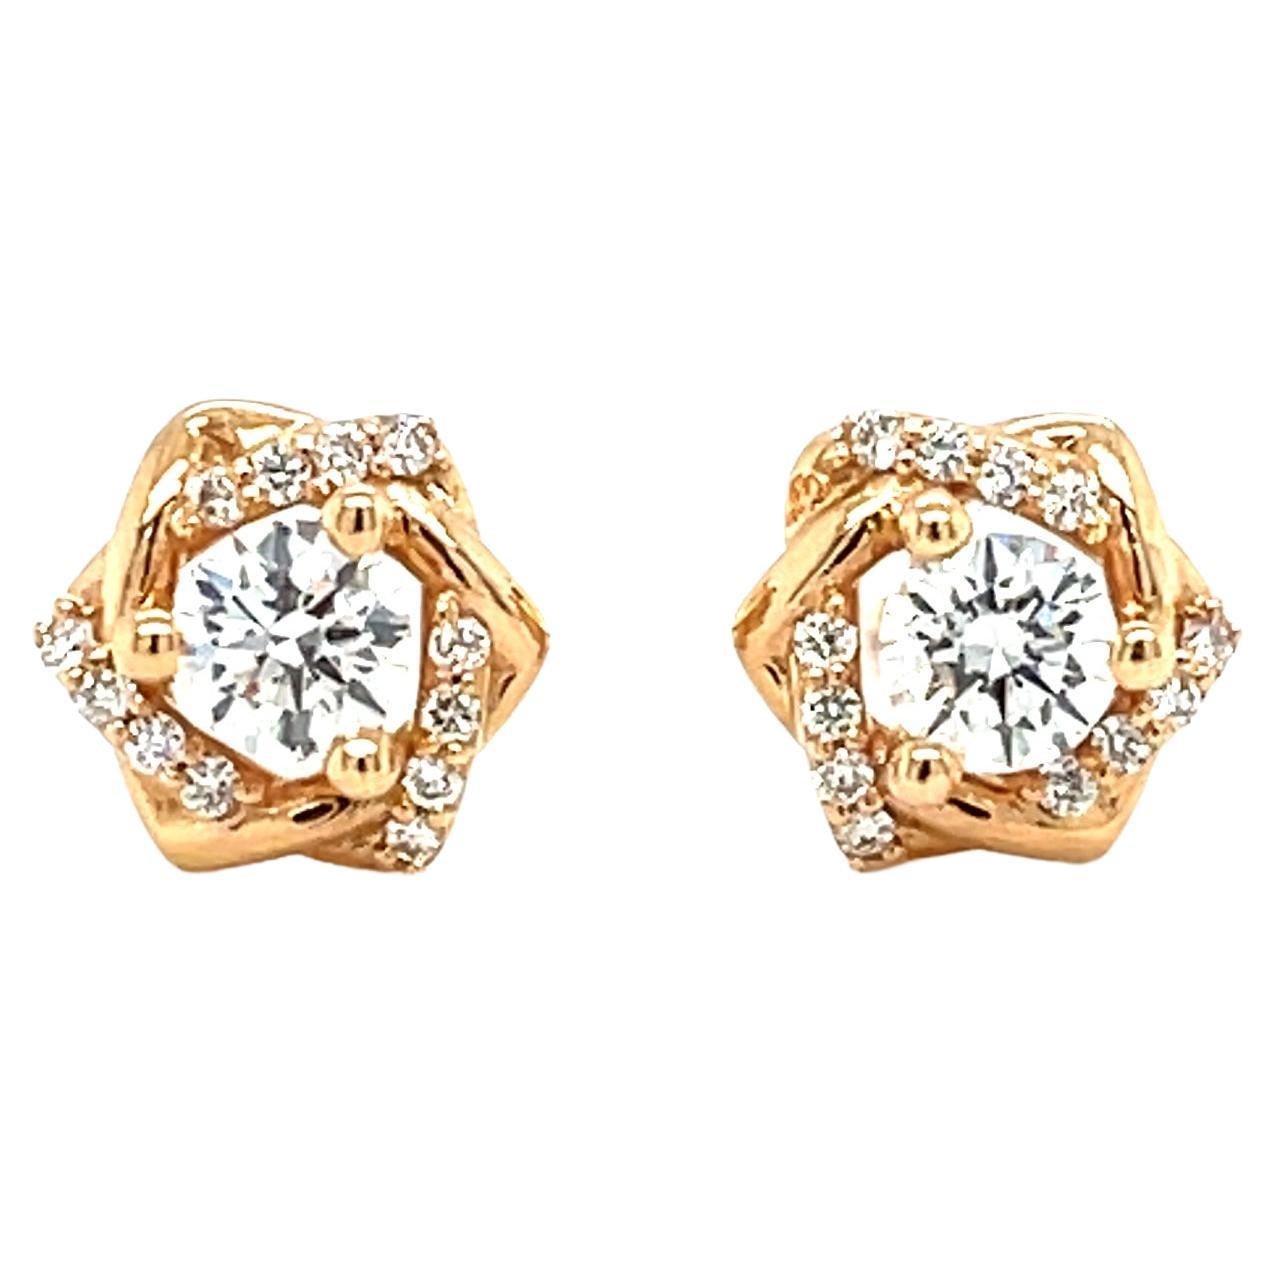 Pair of E VVS2 Round Diamonds 0.62 Carats in 18K Rose Gold  GIA Certified